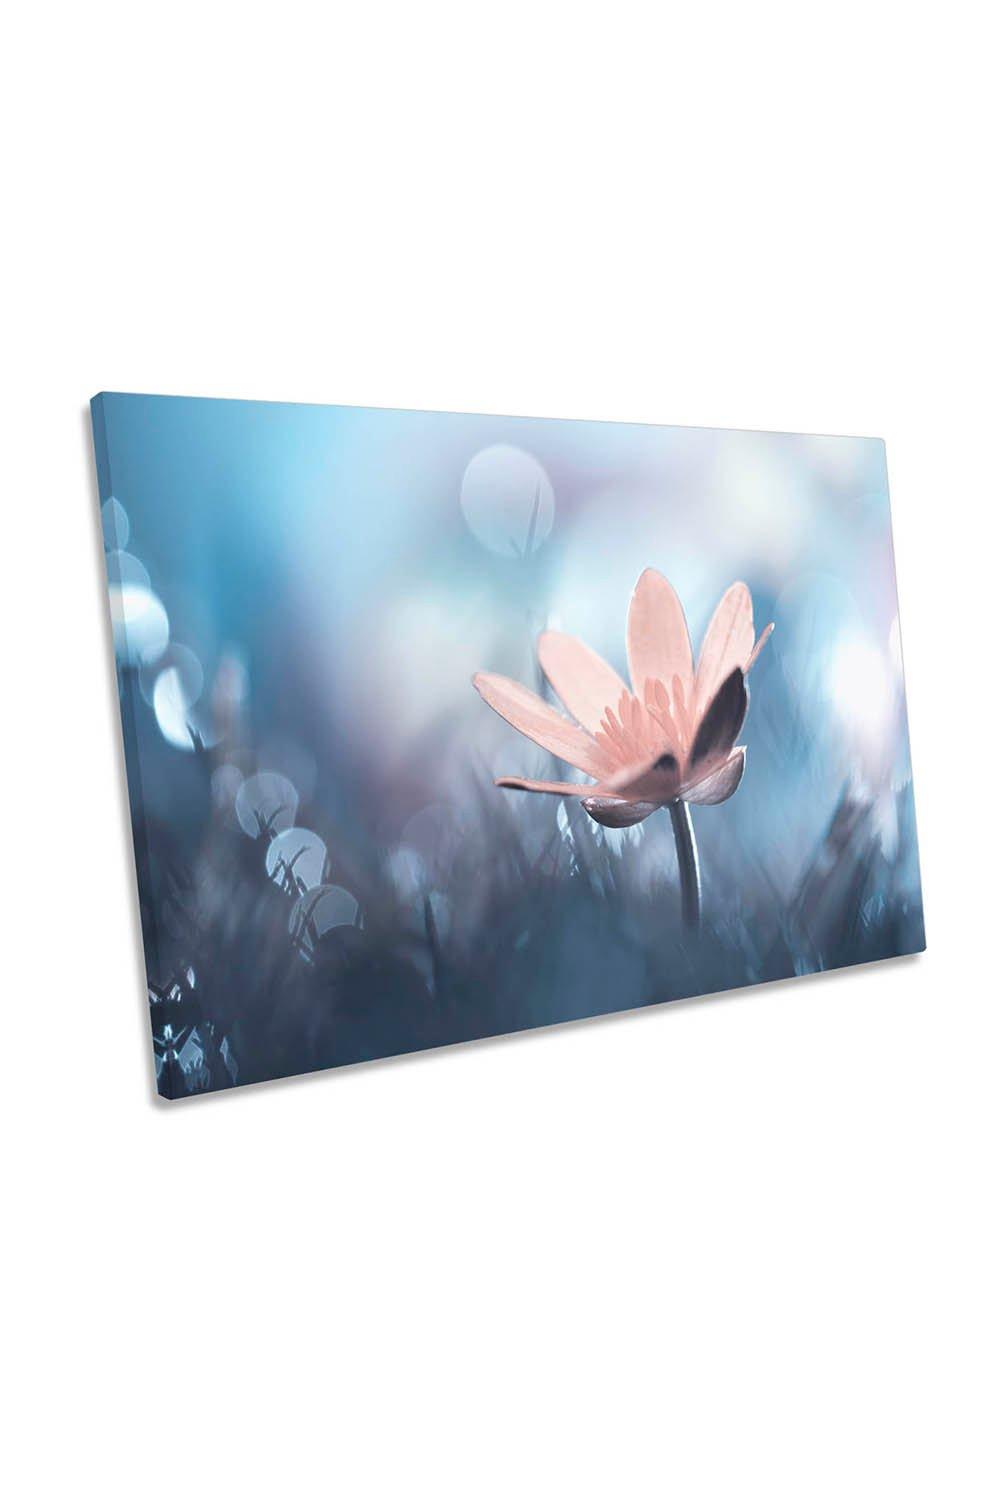 Mellow Blue Mood Pink Flower Floral Canvas Wall Art Picture Print